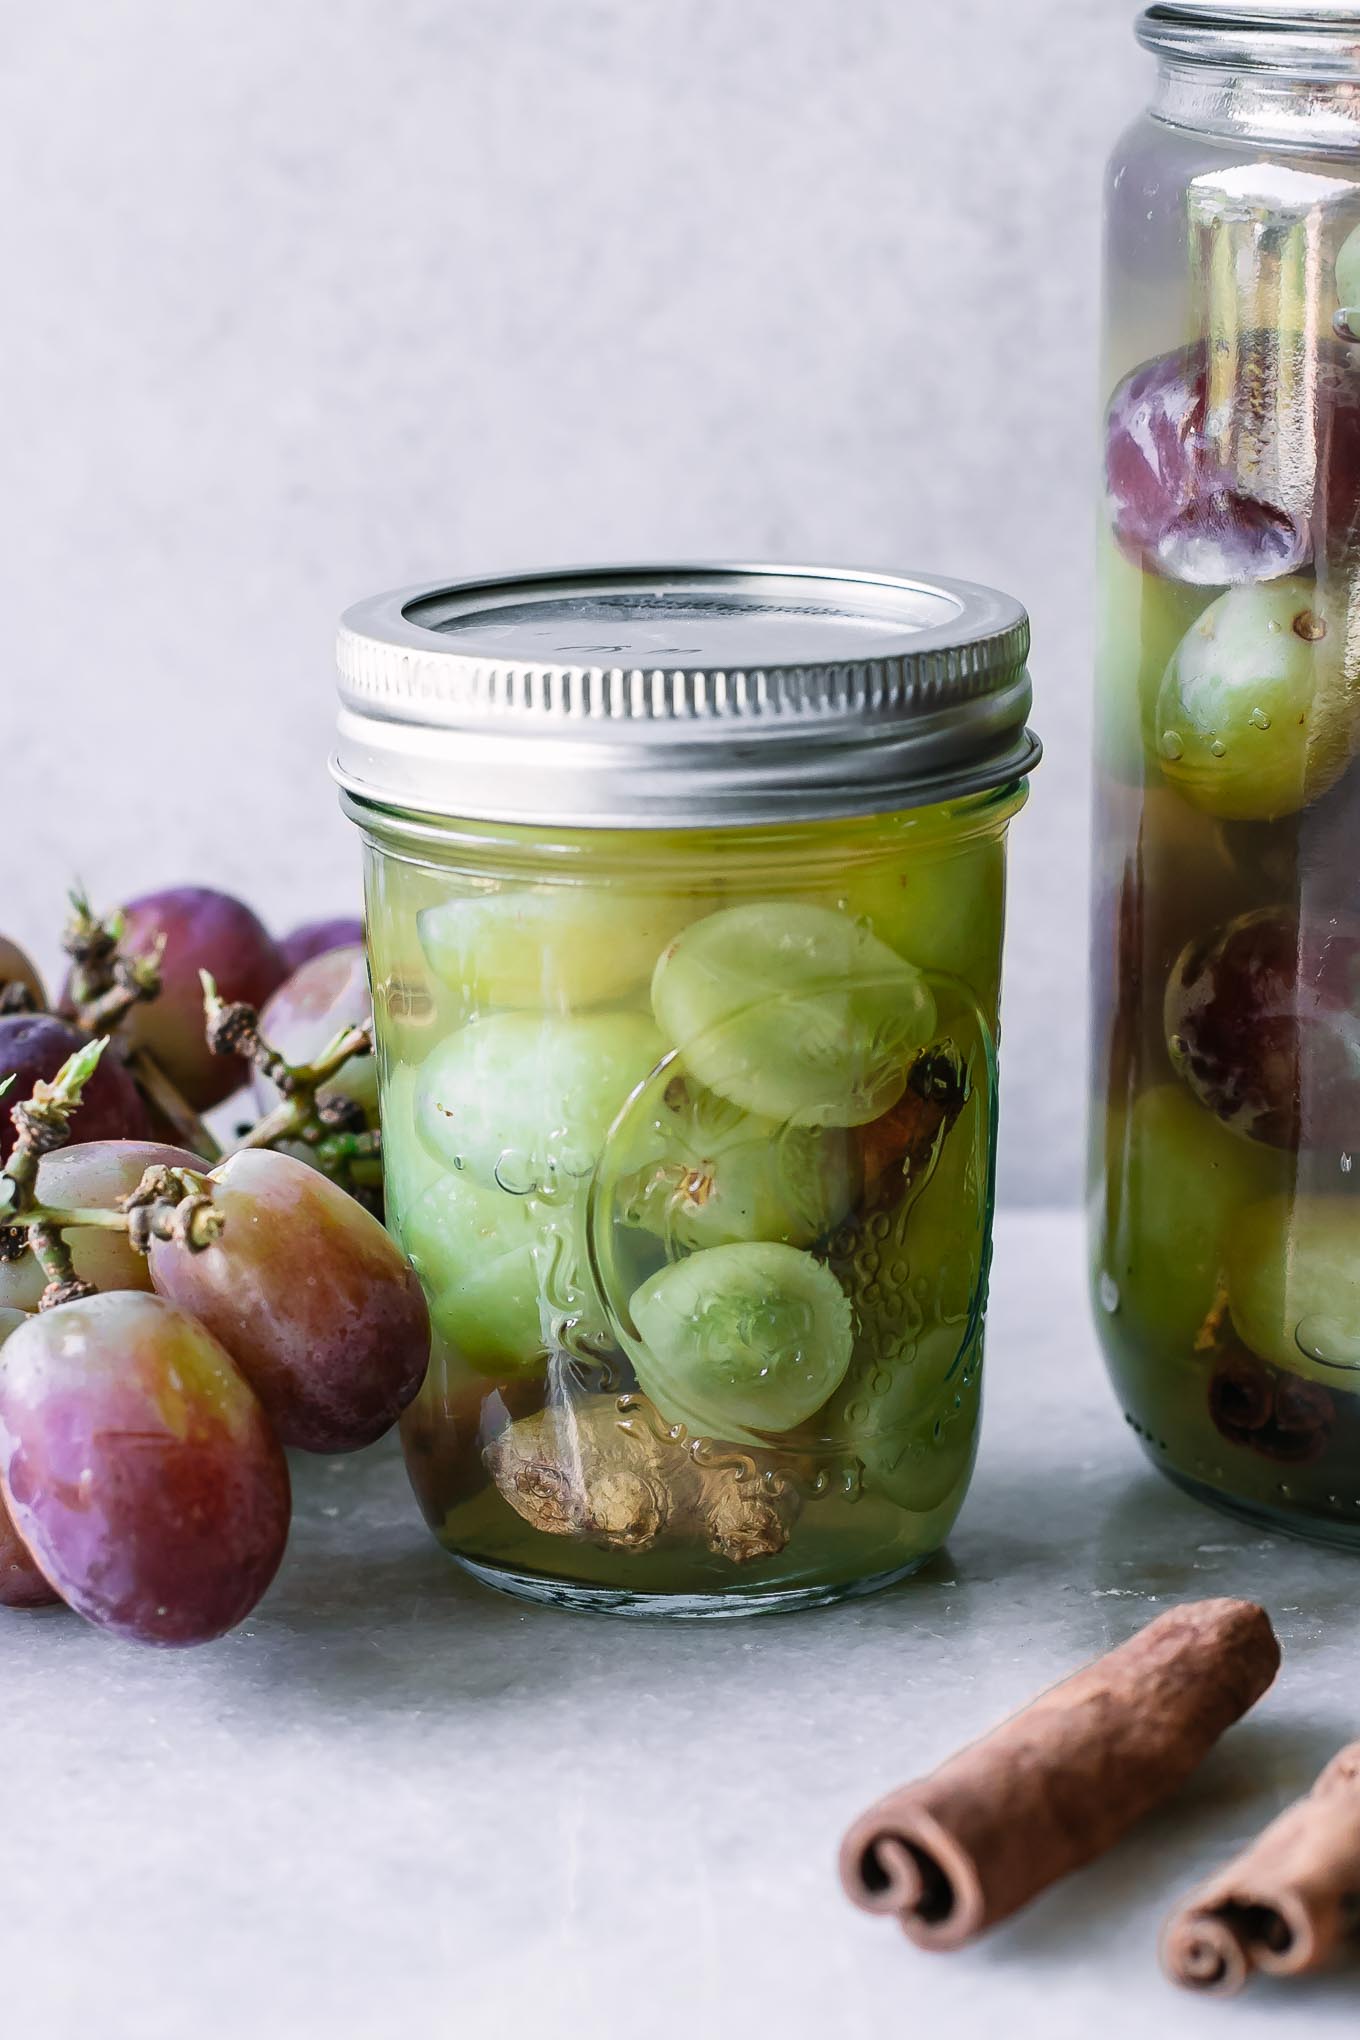 a jar of sliced green grapes in a pickling jar with a bunch of whole red grapes